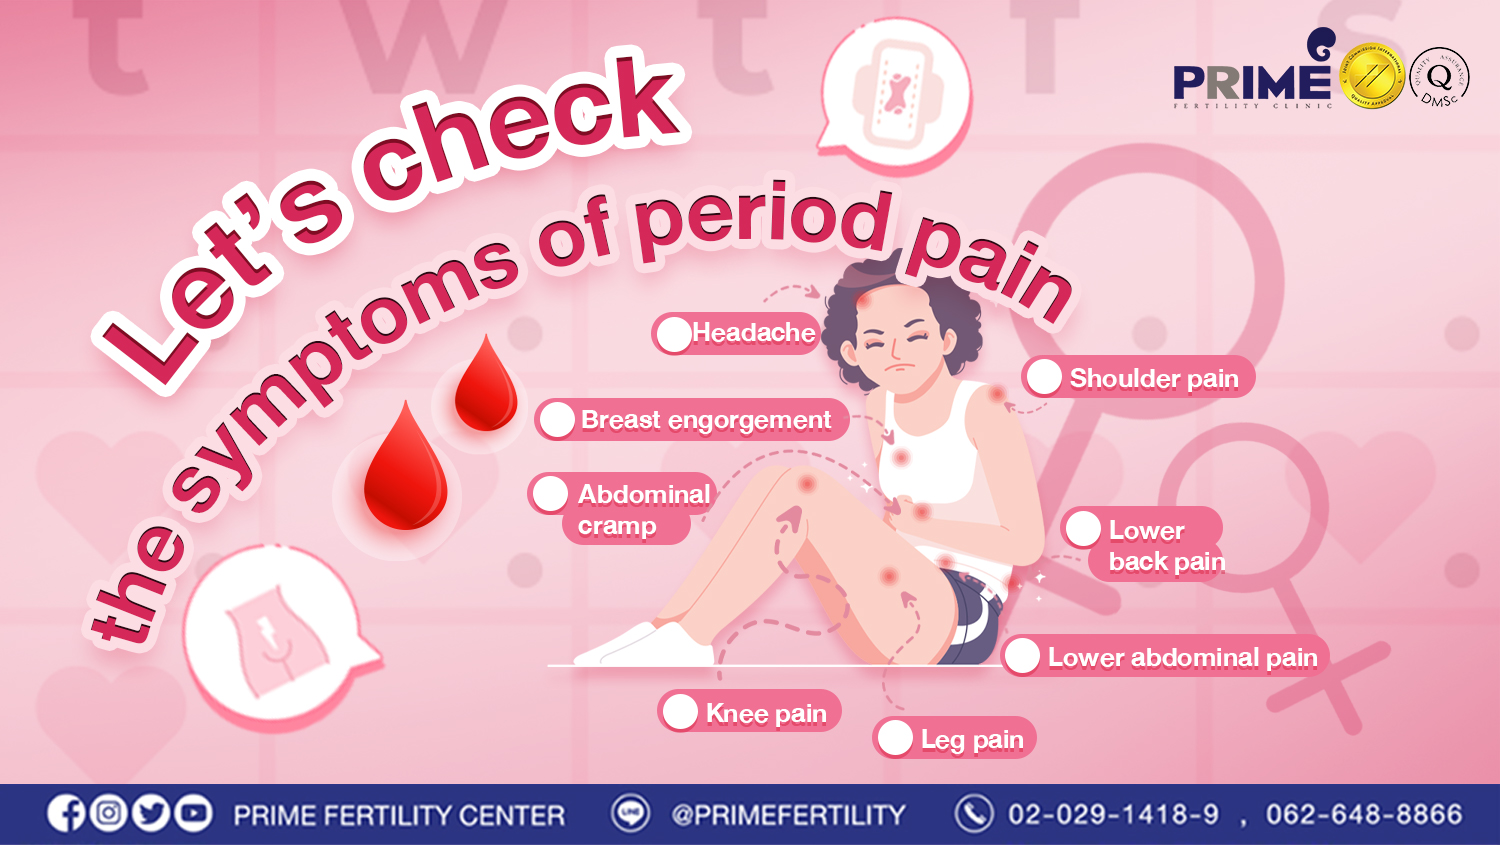 Let’s check the symptoms of period pain